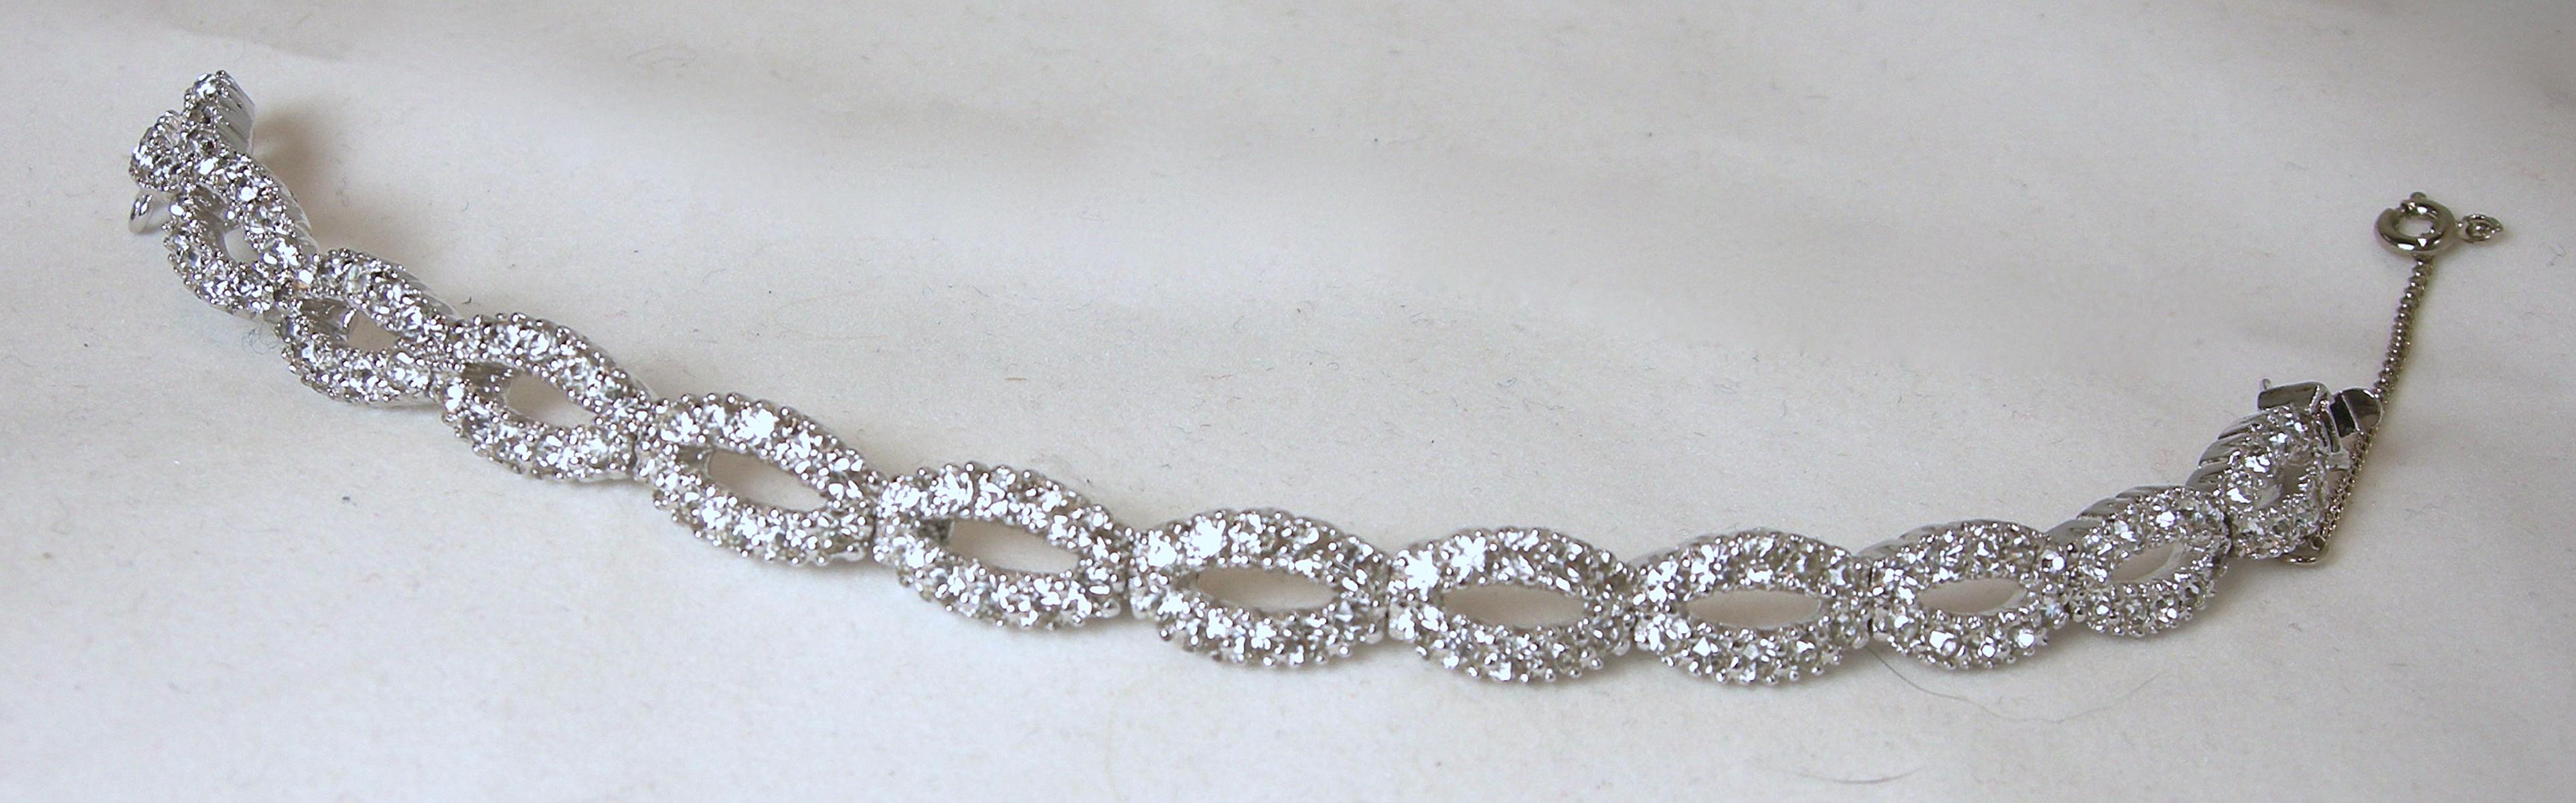 This vintage Panetta crystal bracelet was made to look real and it does.  Bright, brilliant crystal oval links go completely around. It has a slide-in clasp in a rhodium silver tone setting.  It measures 6-1/2” long x 3/8” wide with a safety chain. 